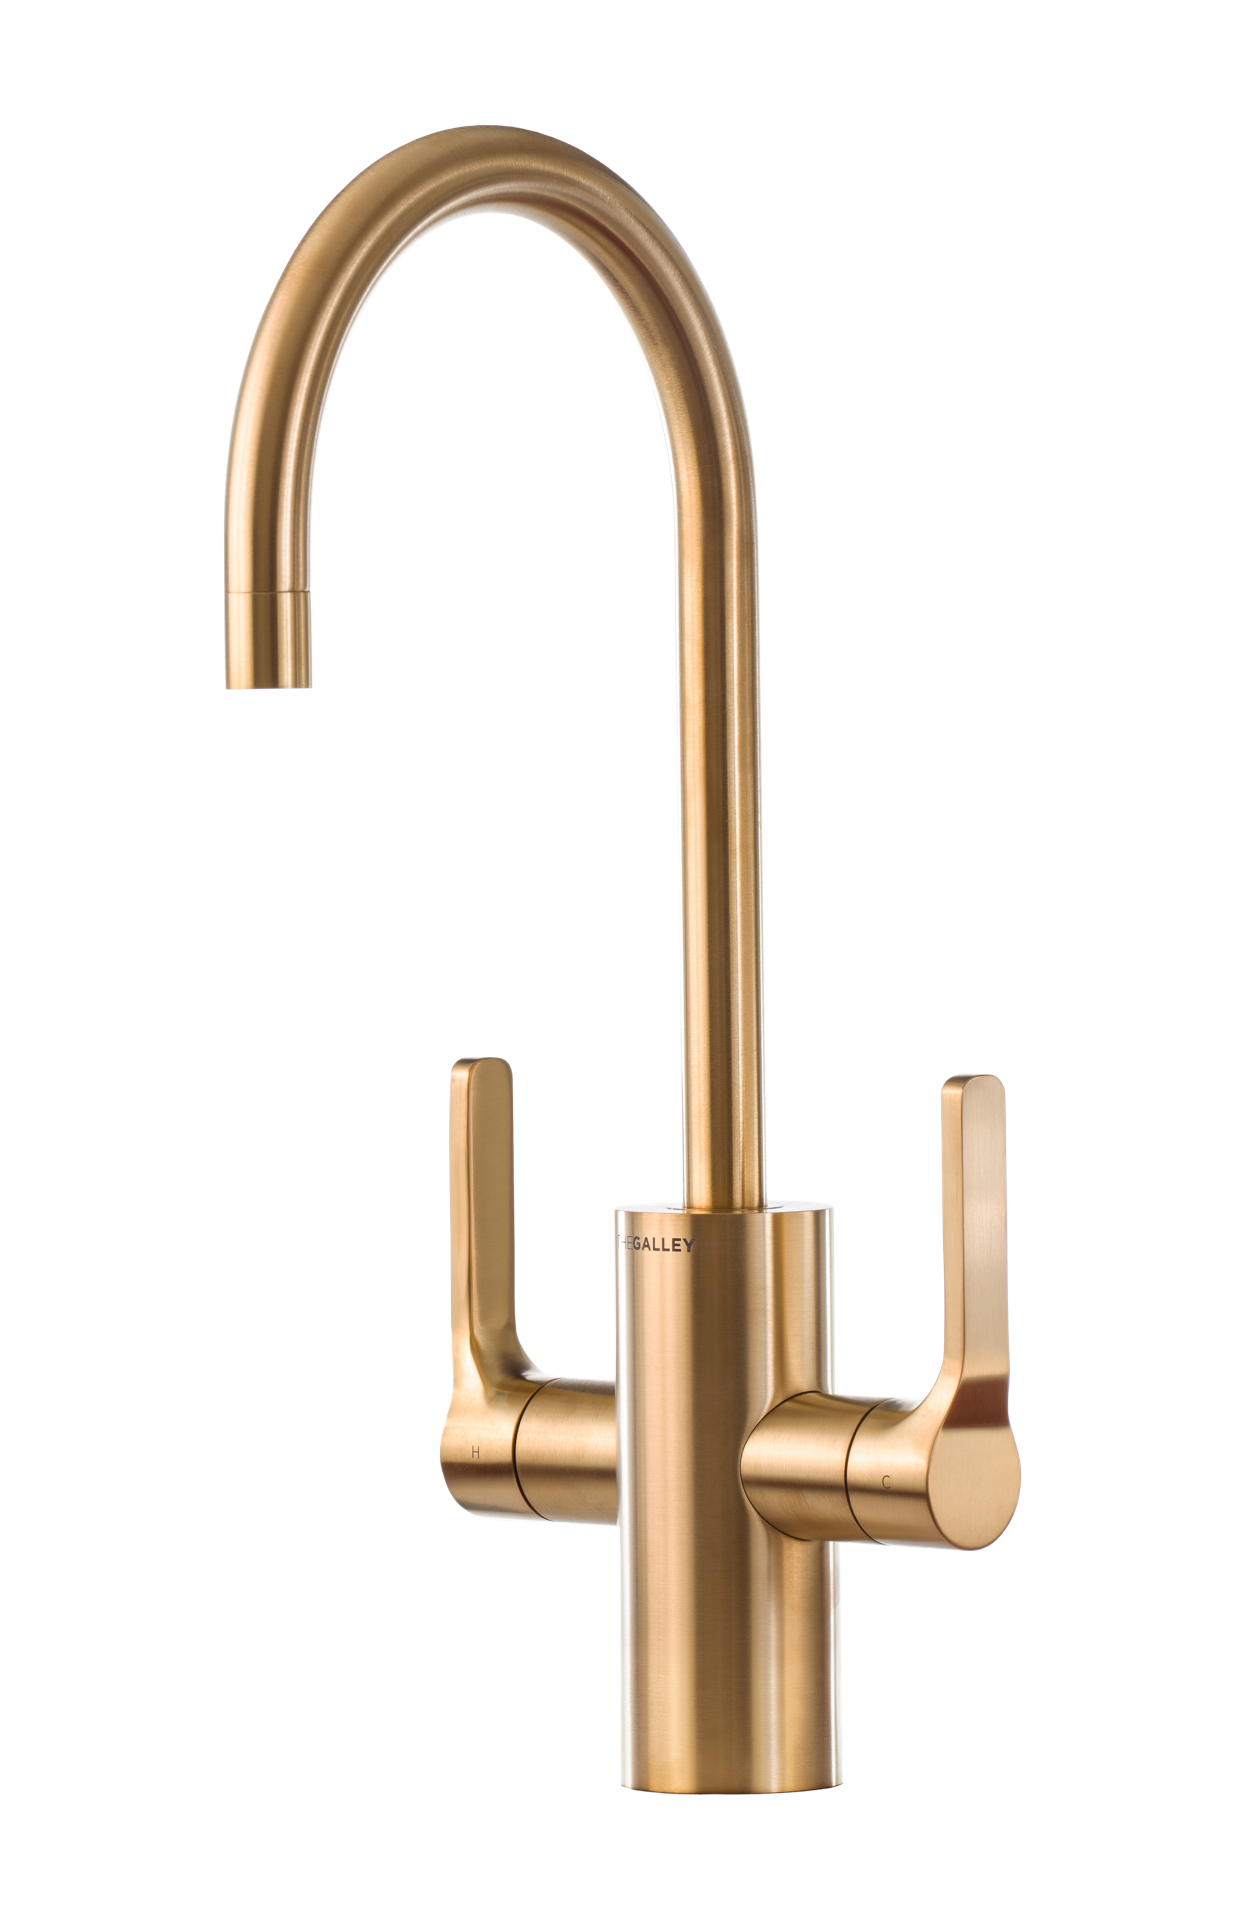 The Galley Ideal Hot and Cold Tap with Ideal Digital Hot Water Tank and Water Filtration System